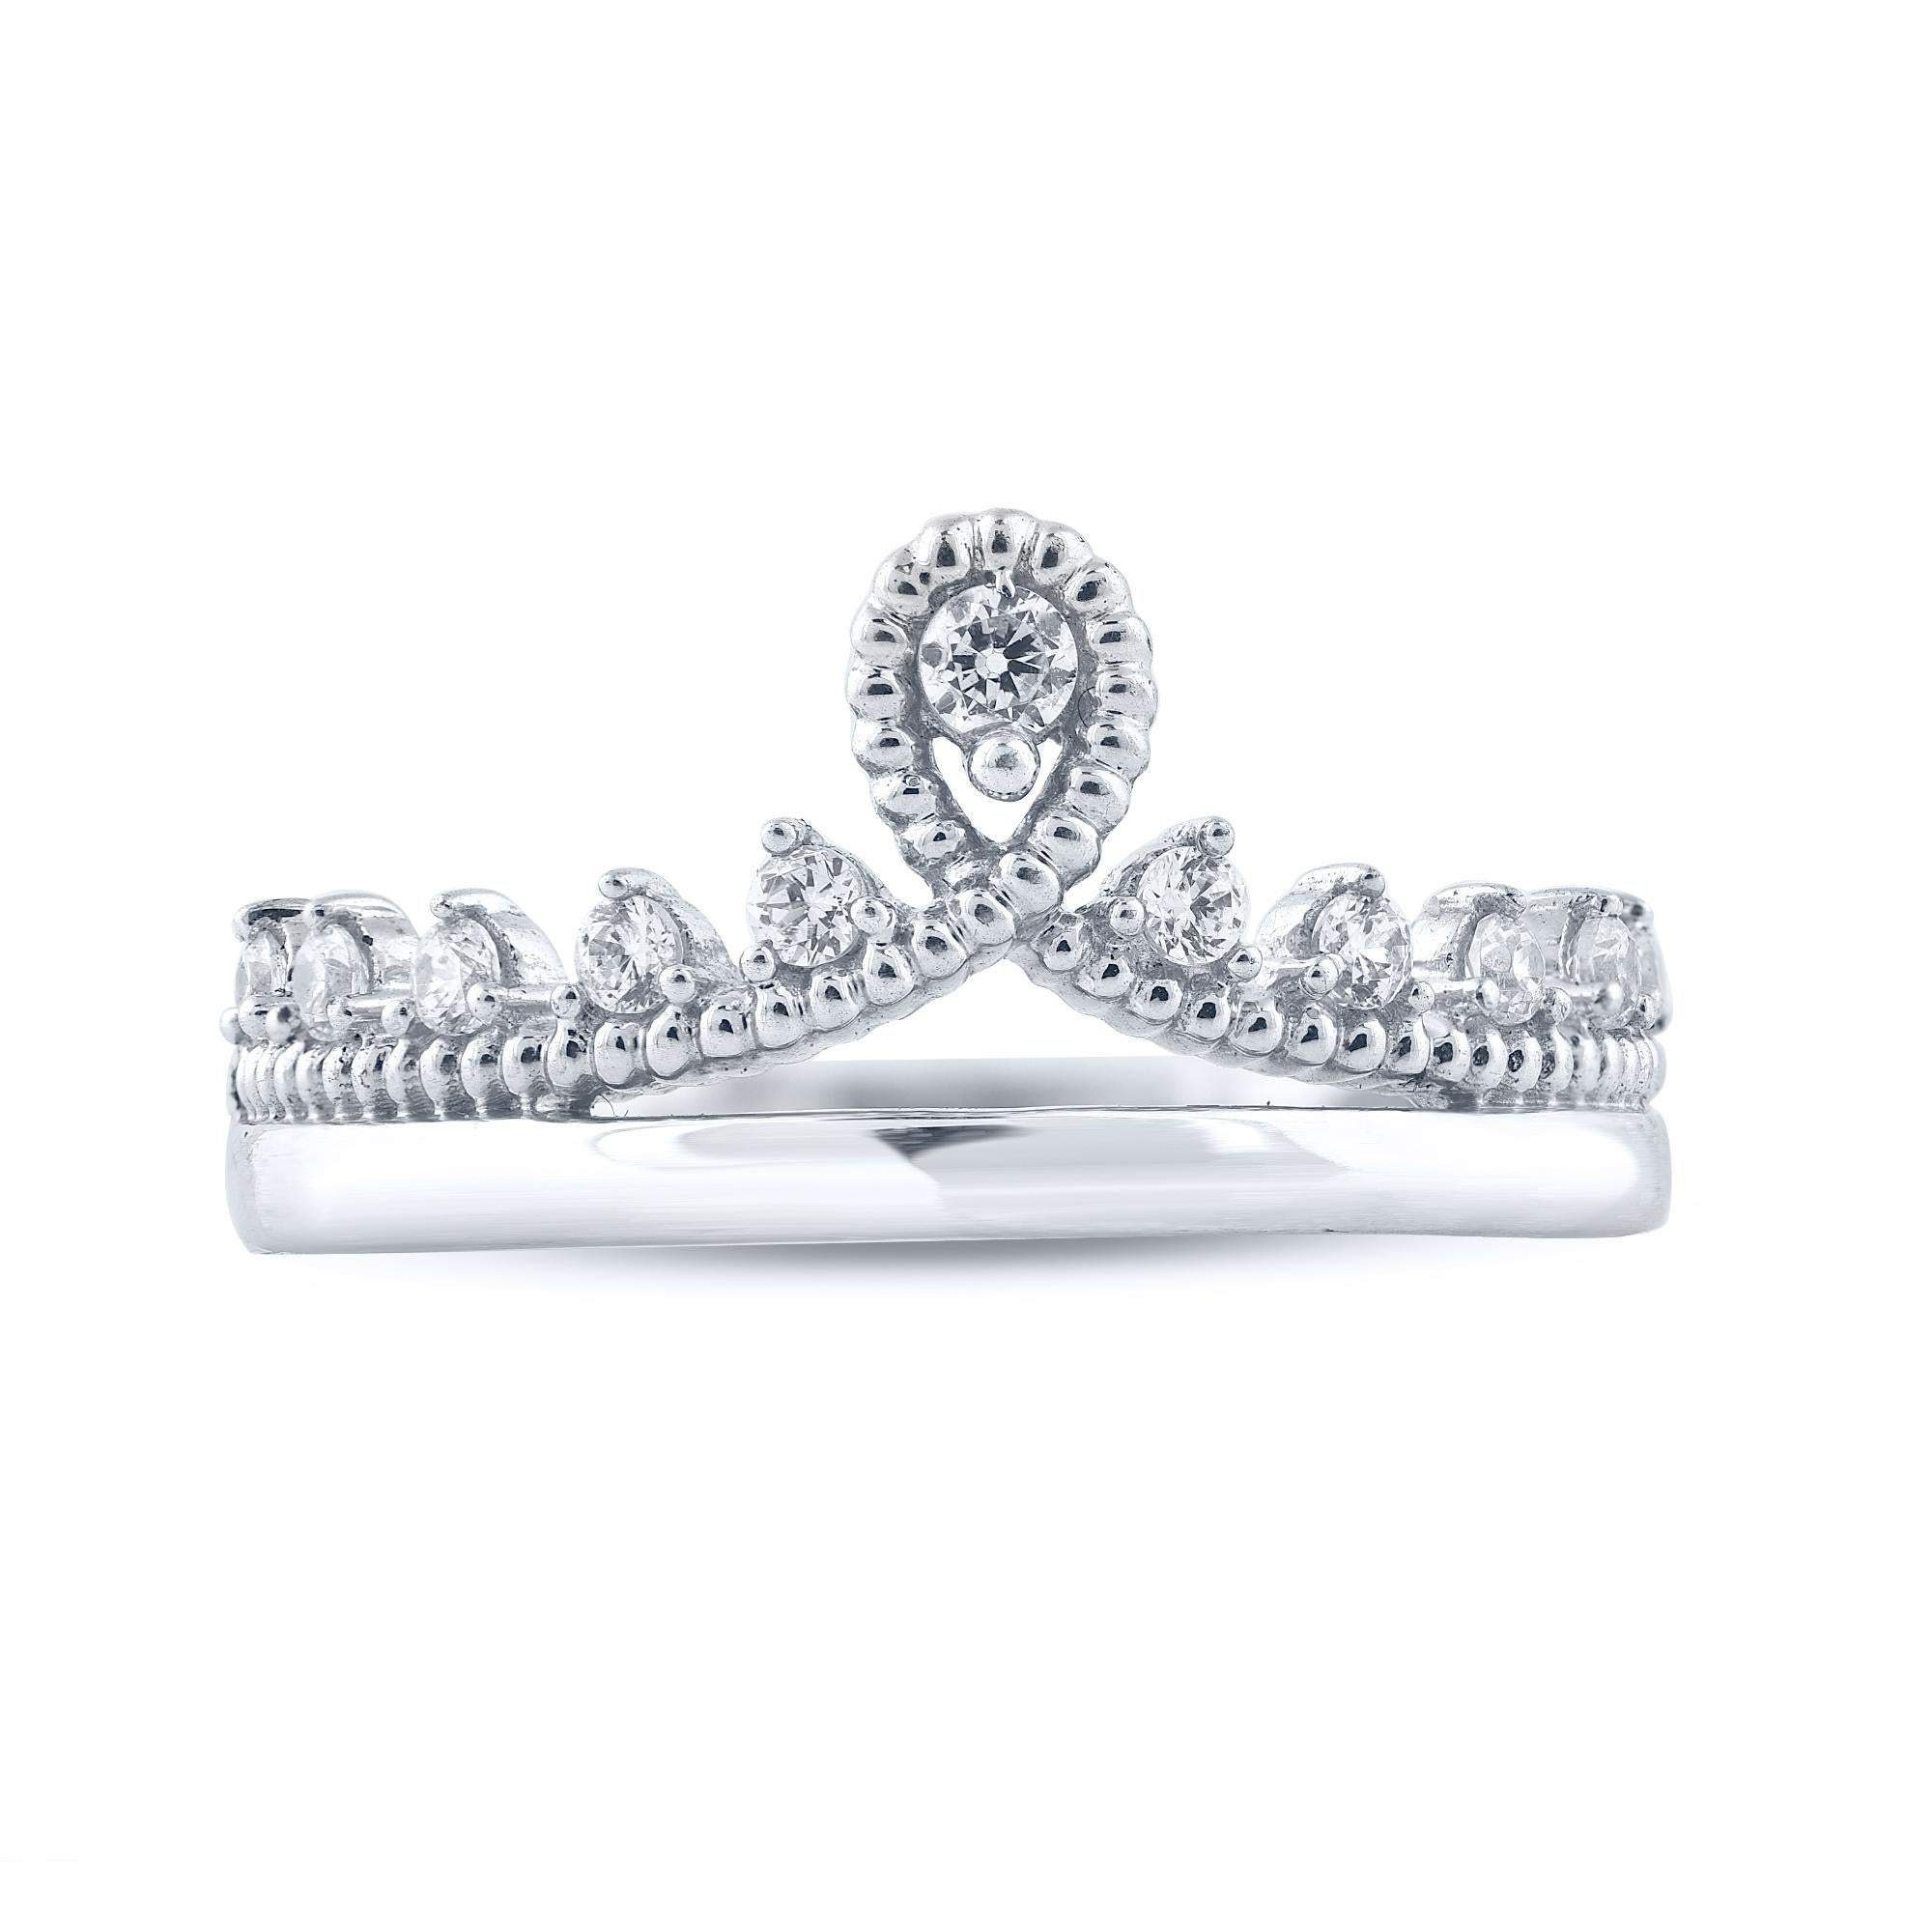 This Princess Tiara Ring is expertly crafted in 14 Karat white gold and features 11 brilliant cut round diamonds set in prong setting. The diamonds are graded as H-I color and I2 clarity. This princess tiara ring has high polish finish and is a